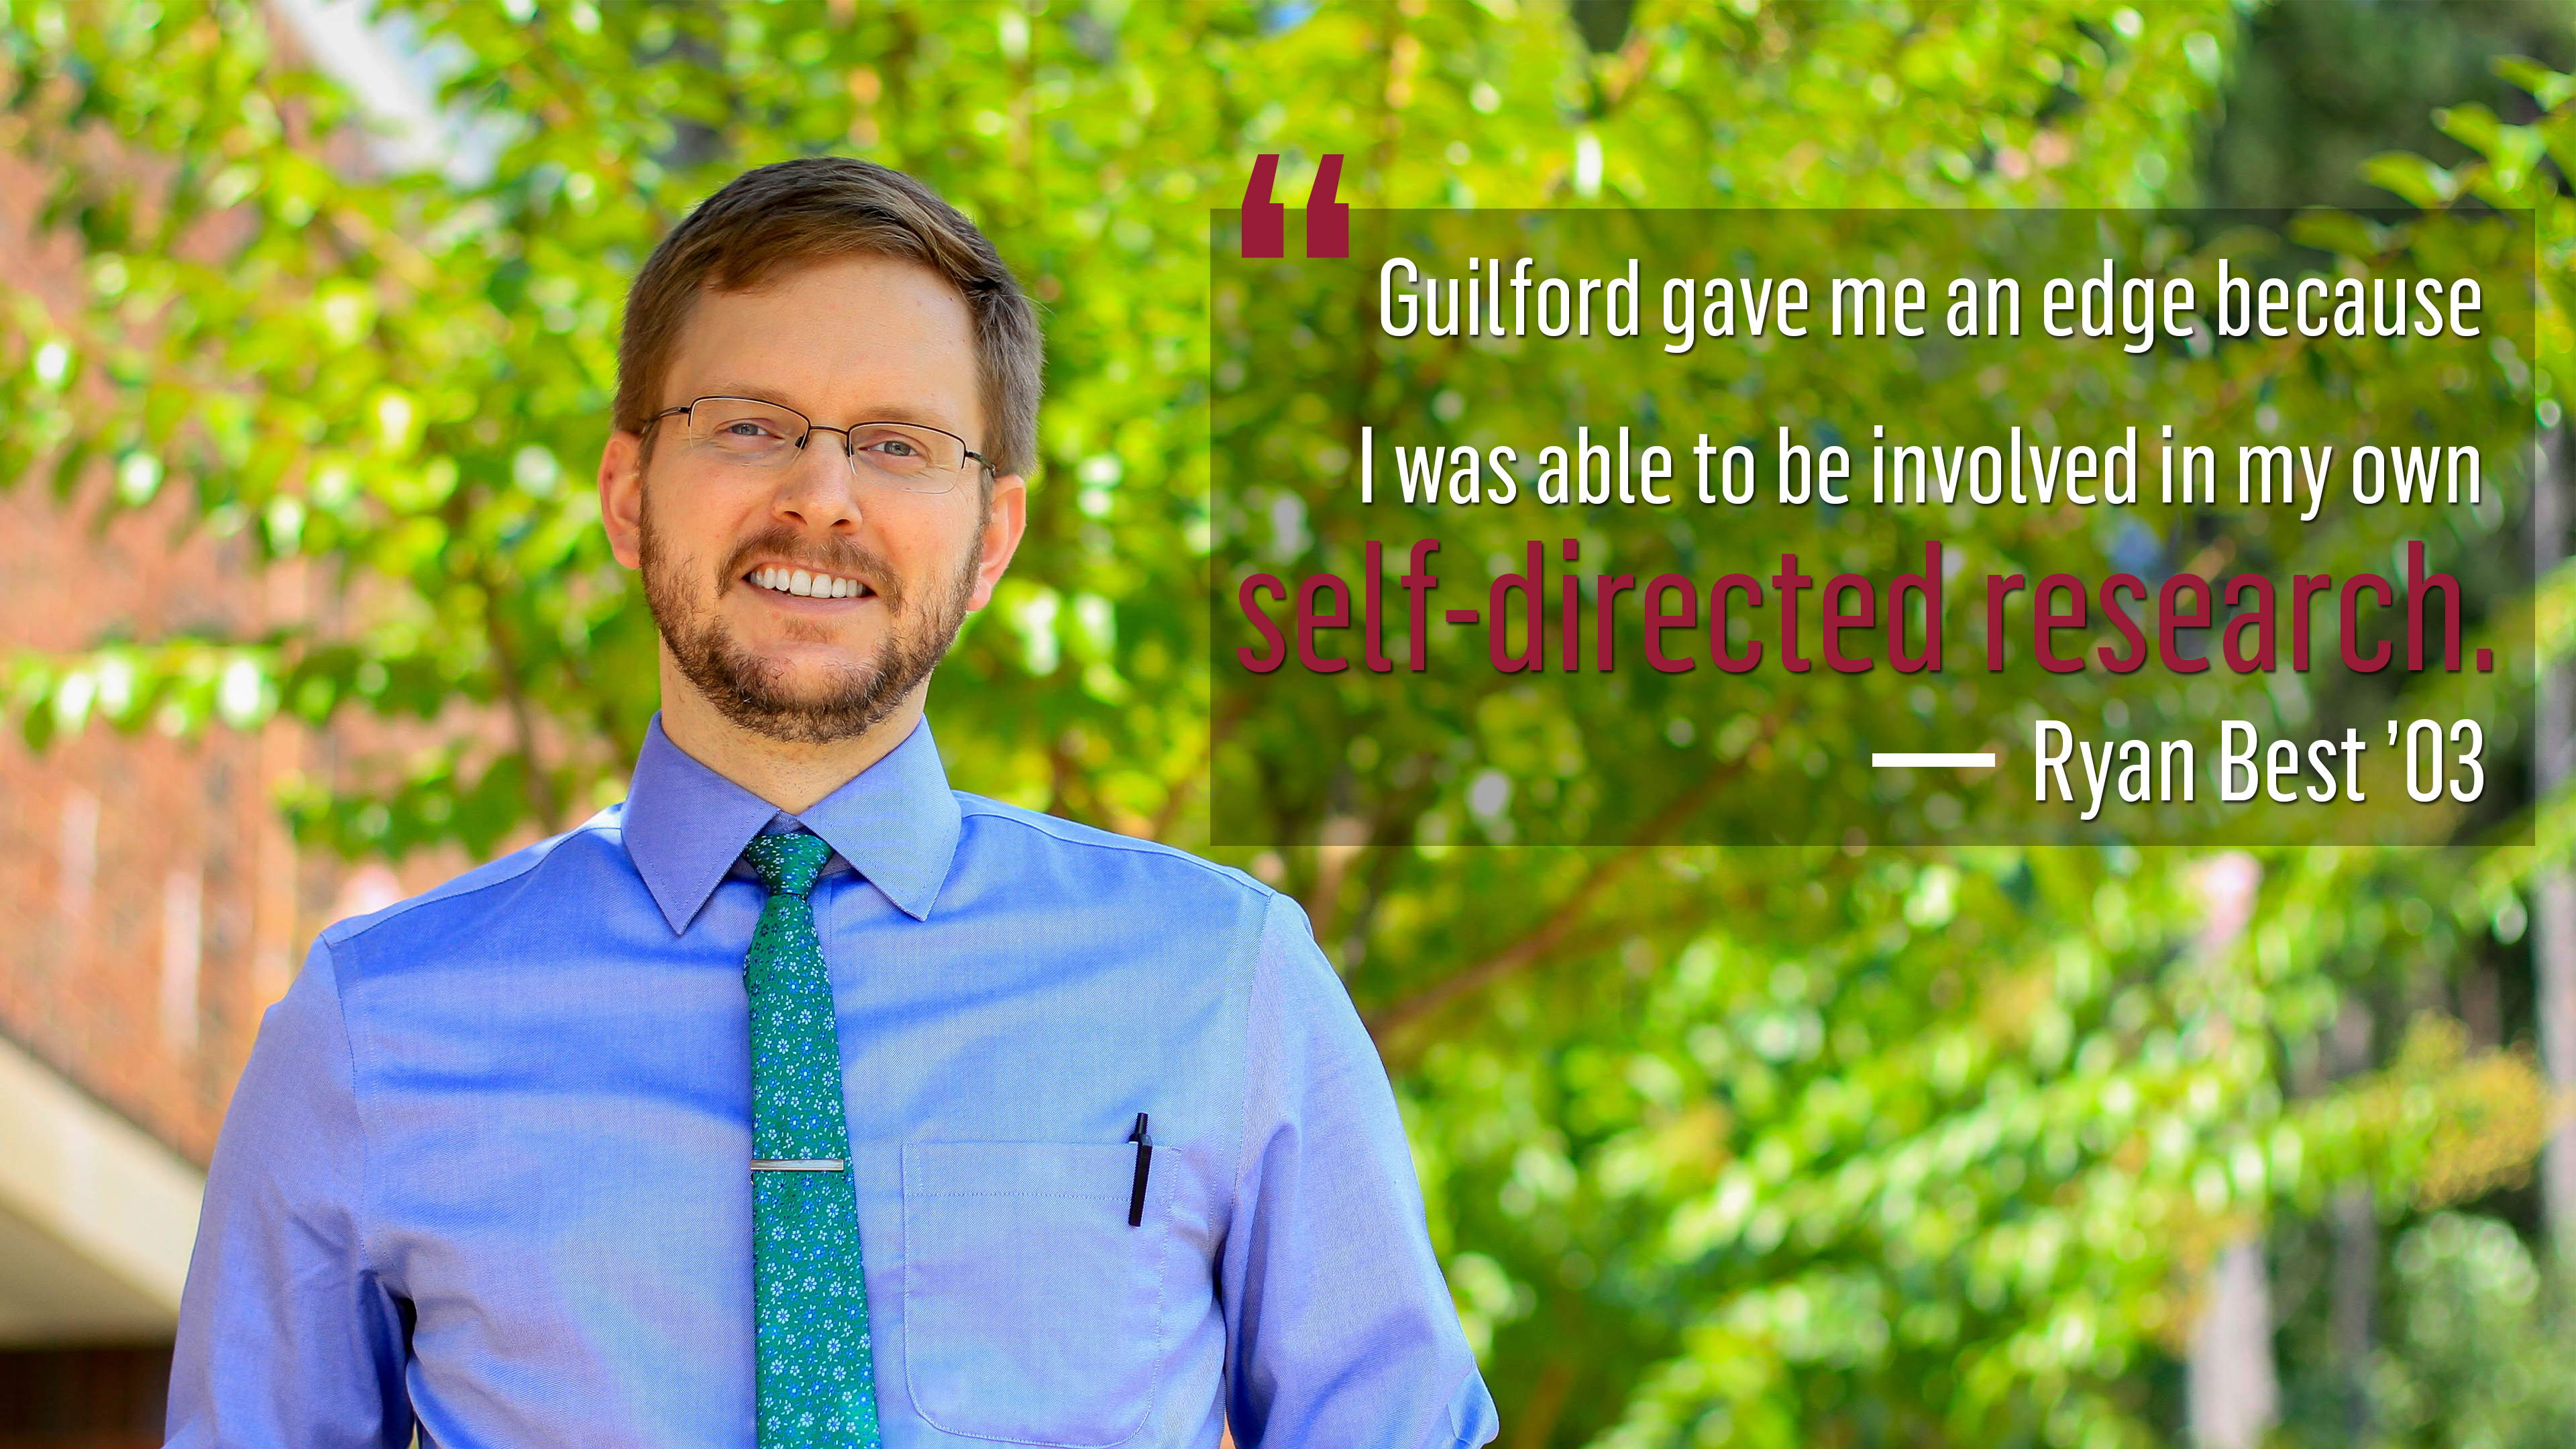 Alumni Ryan Best with a quote that says, "Guilford gave me an edge because I was able to be involved in my own self-directed research."